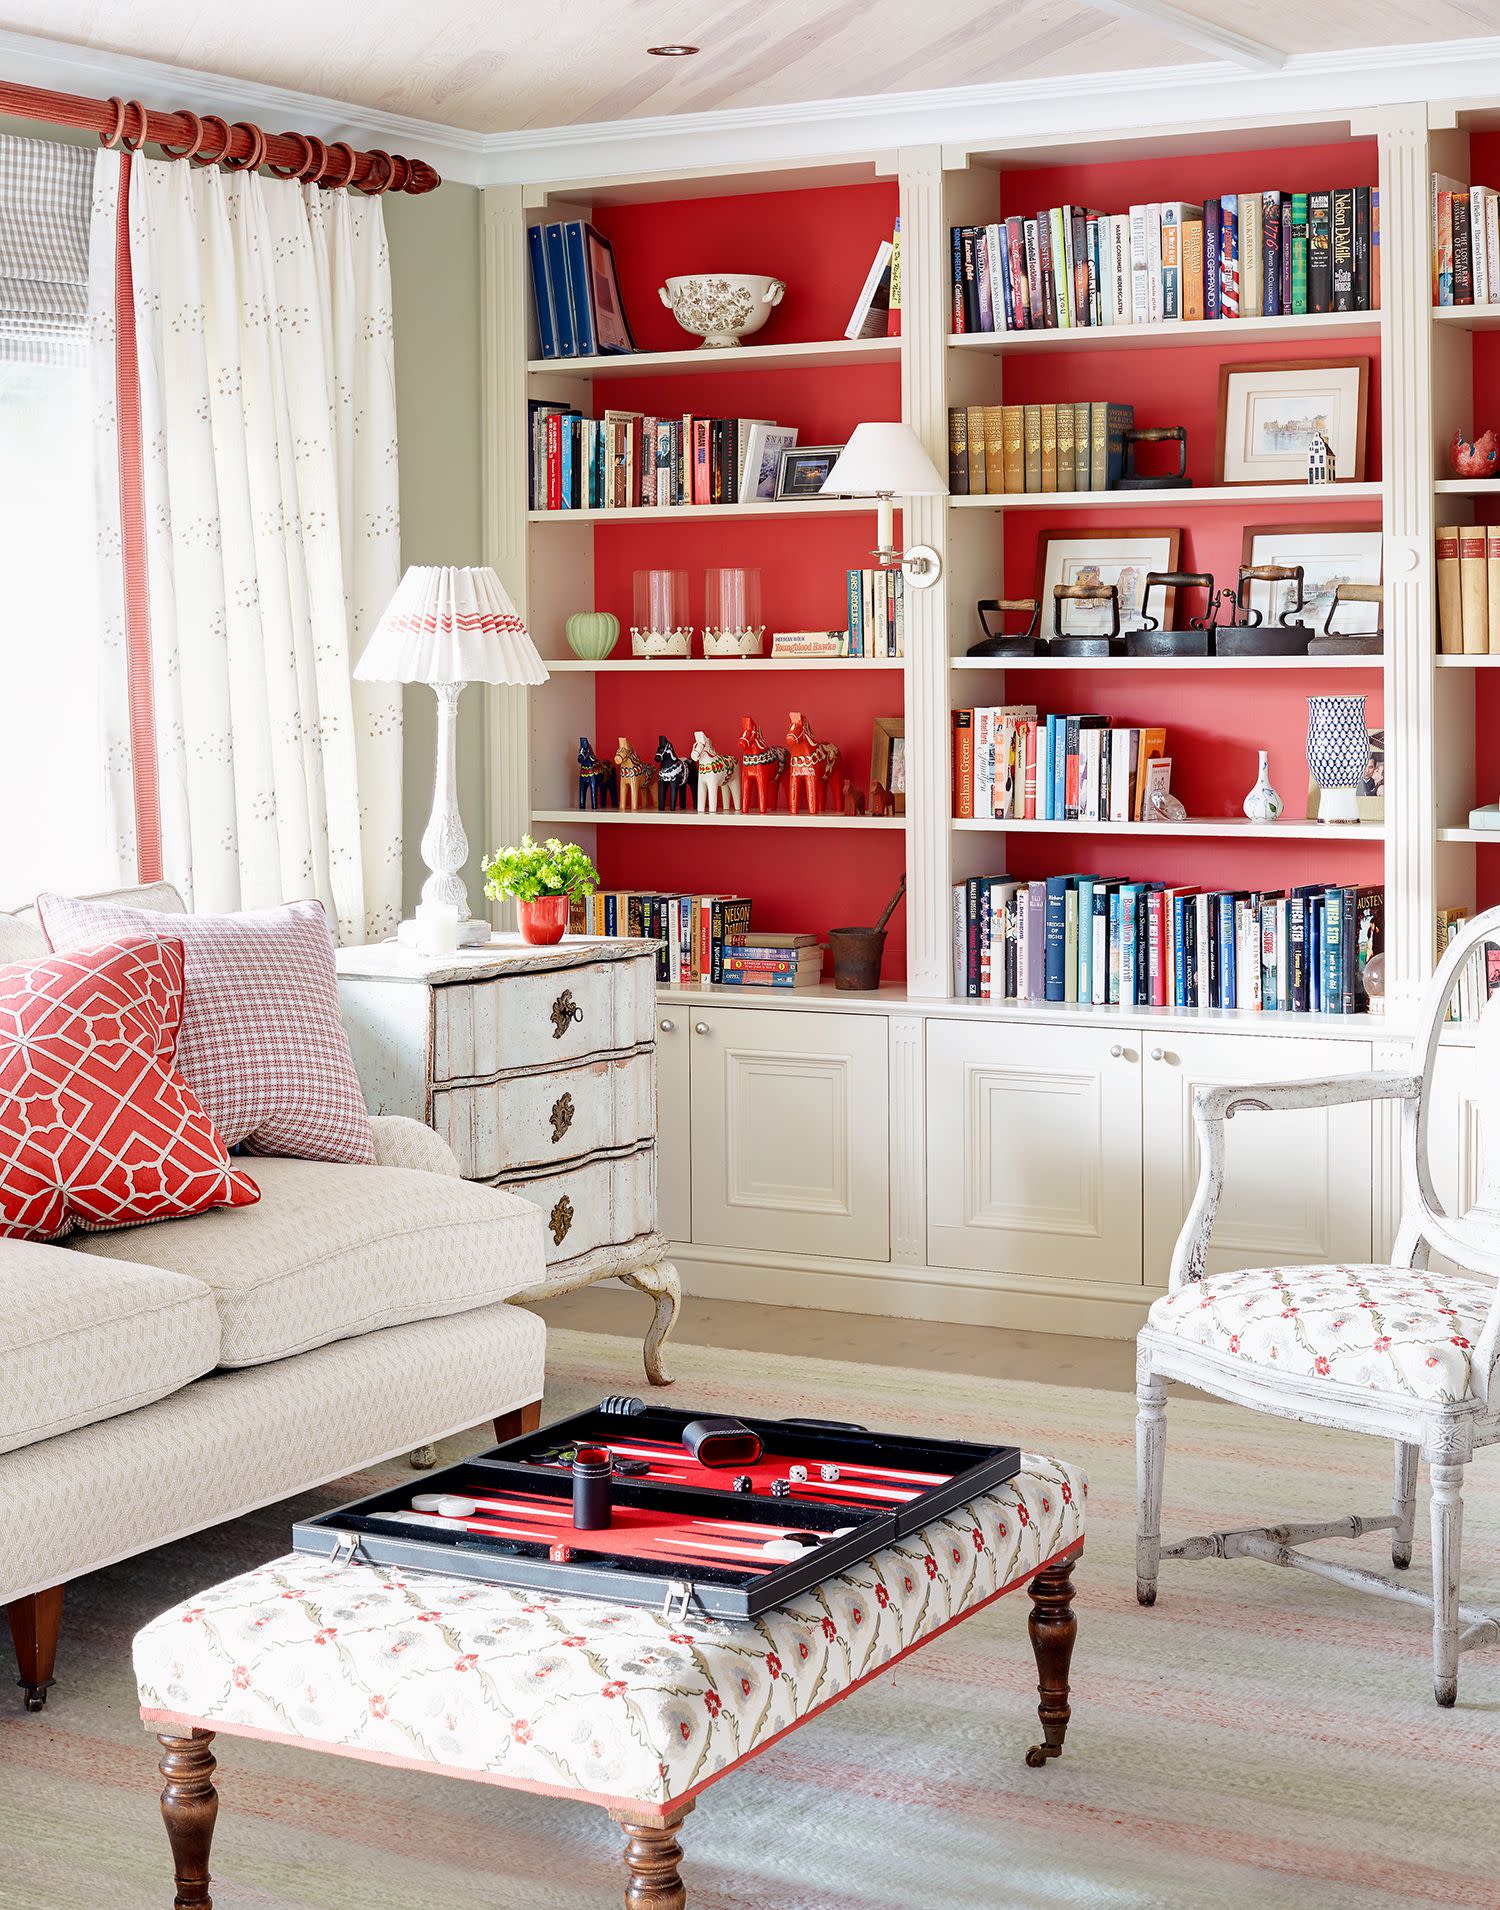 10+ Home Library Ideas to Make Your Collection a True Focal Point